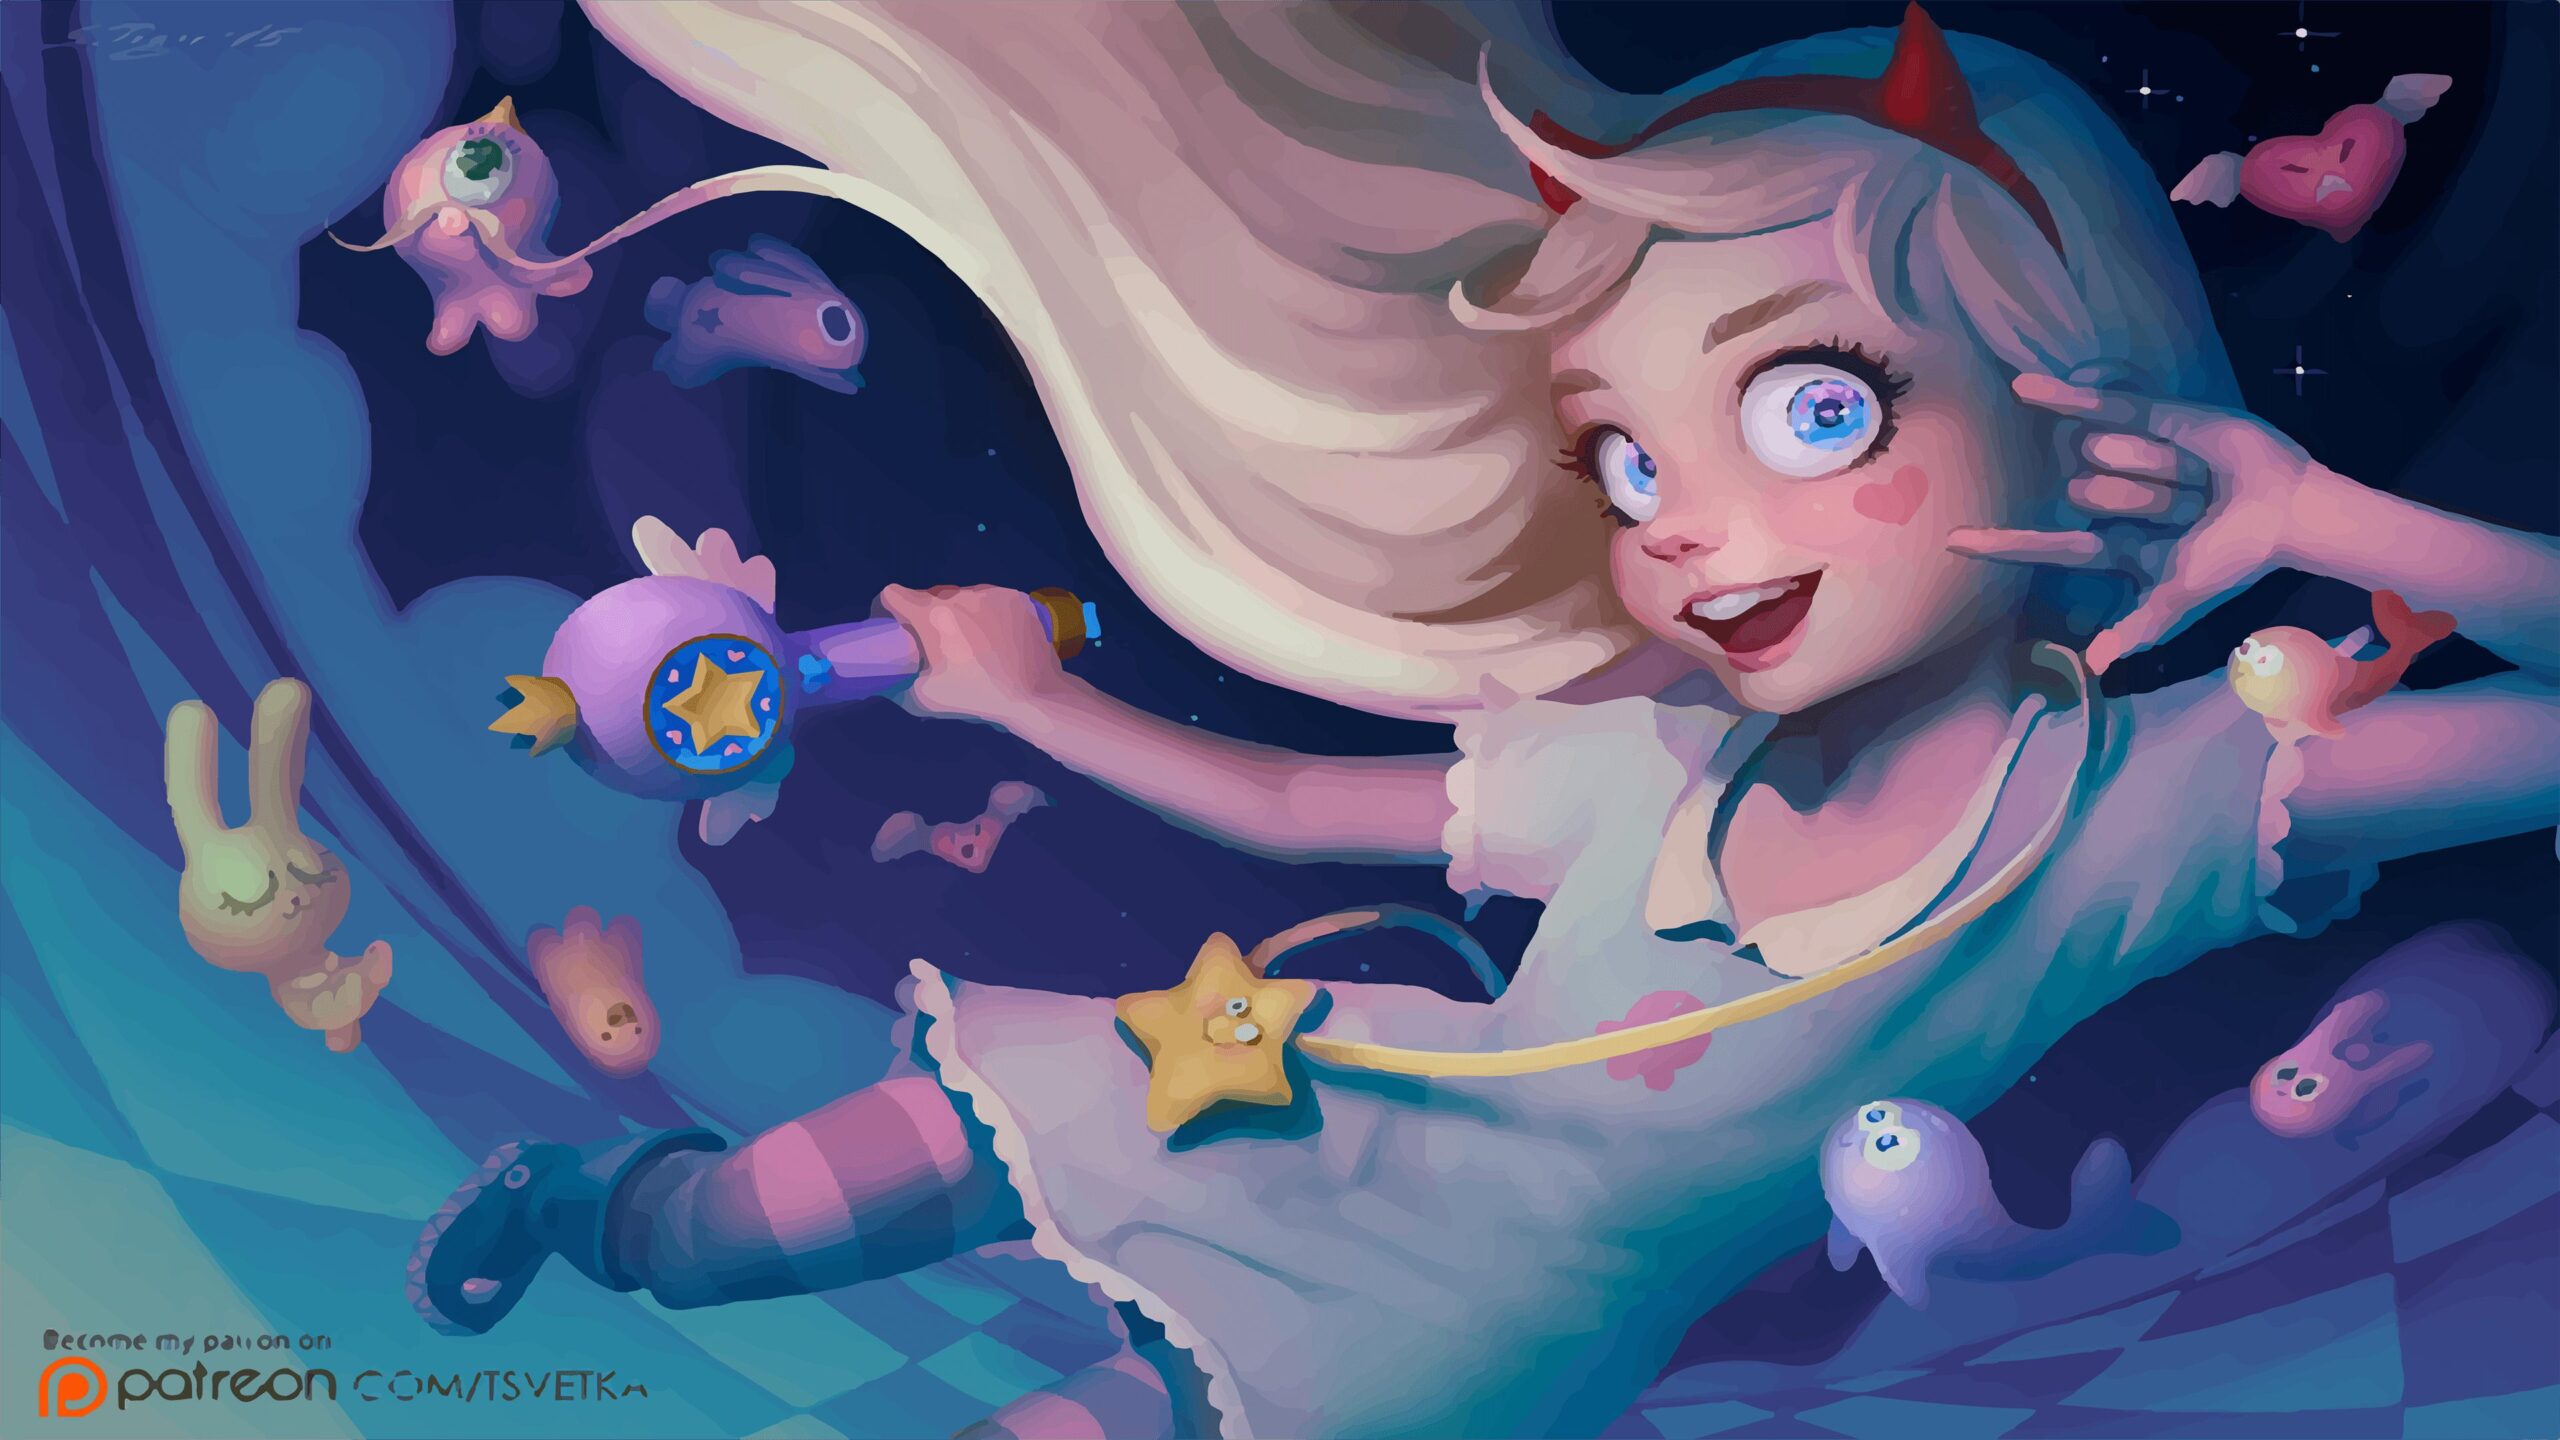 Star Vs The Forces Of Evil Best Wallpaper Hd For Pc